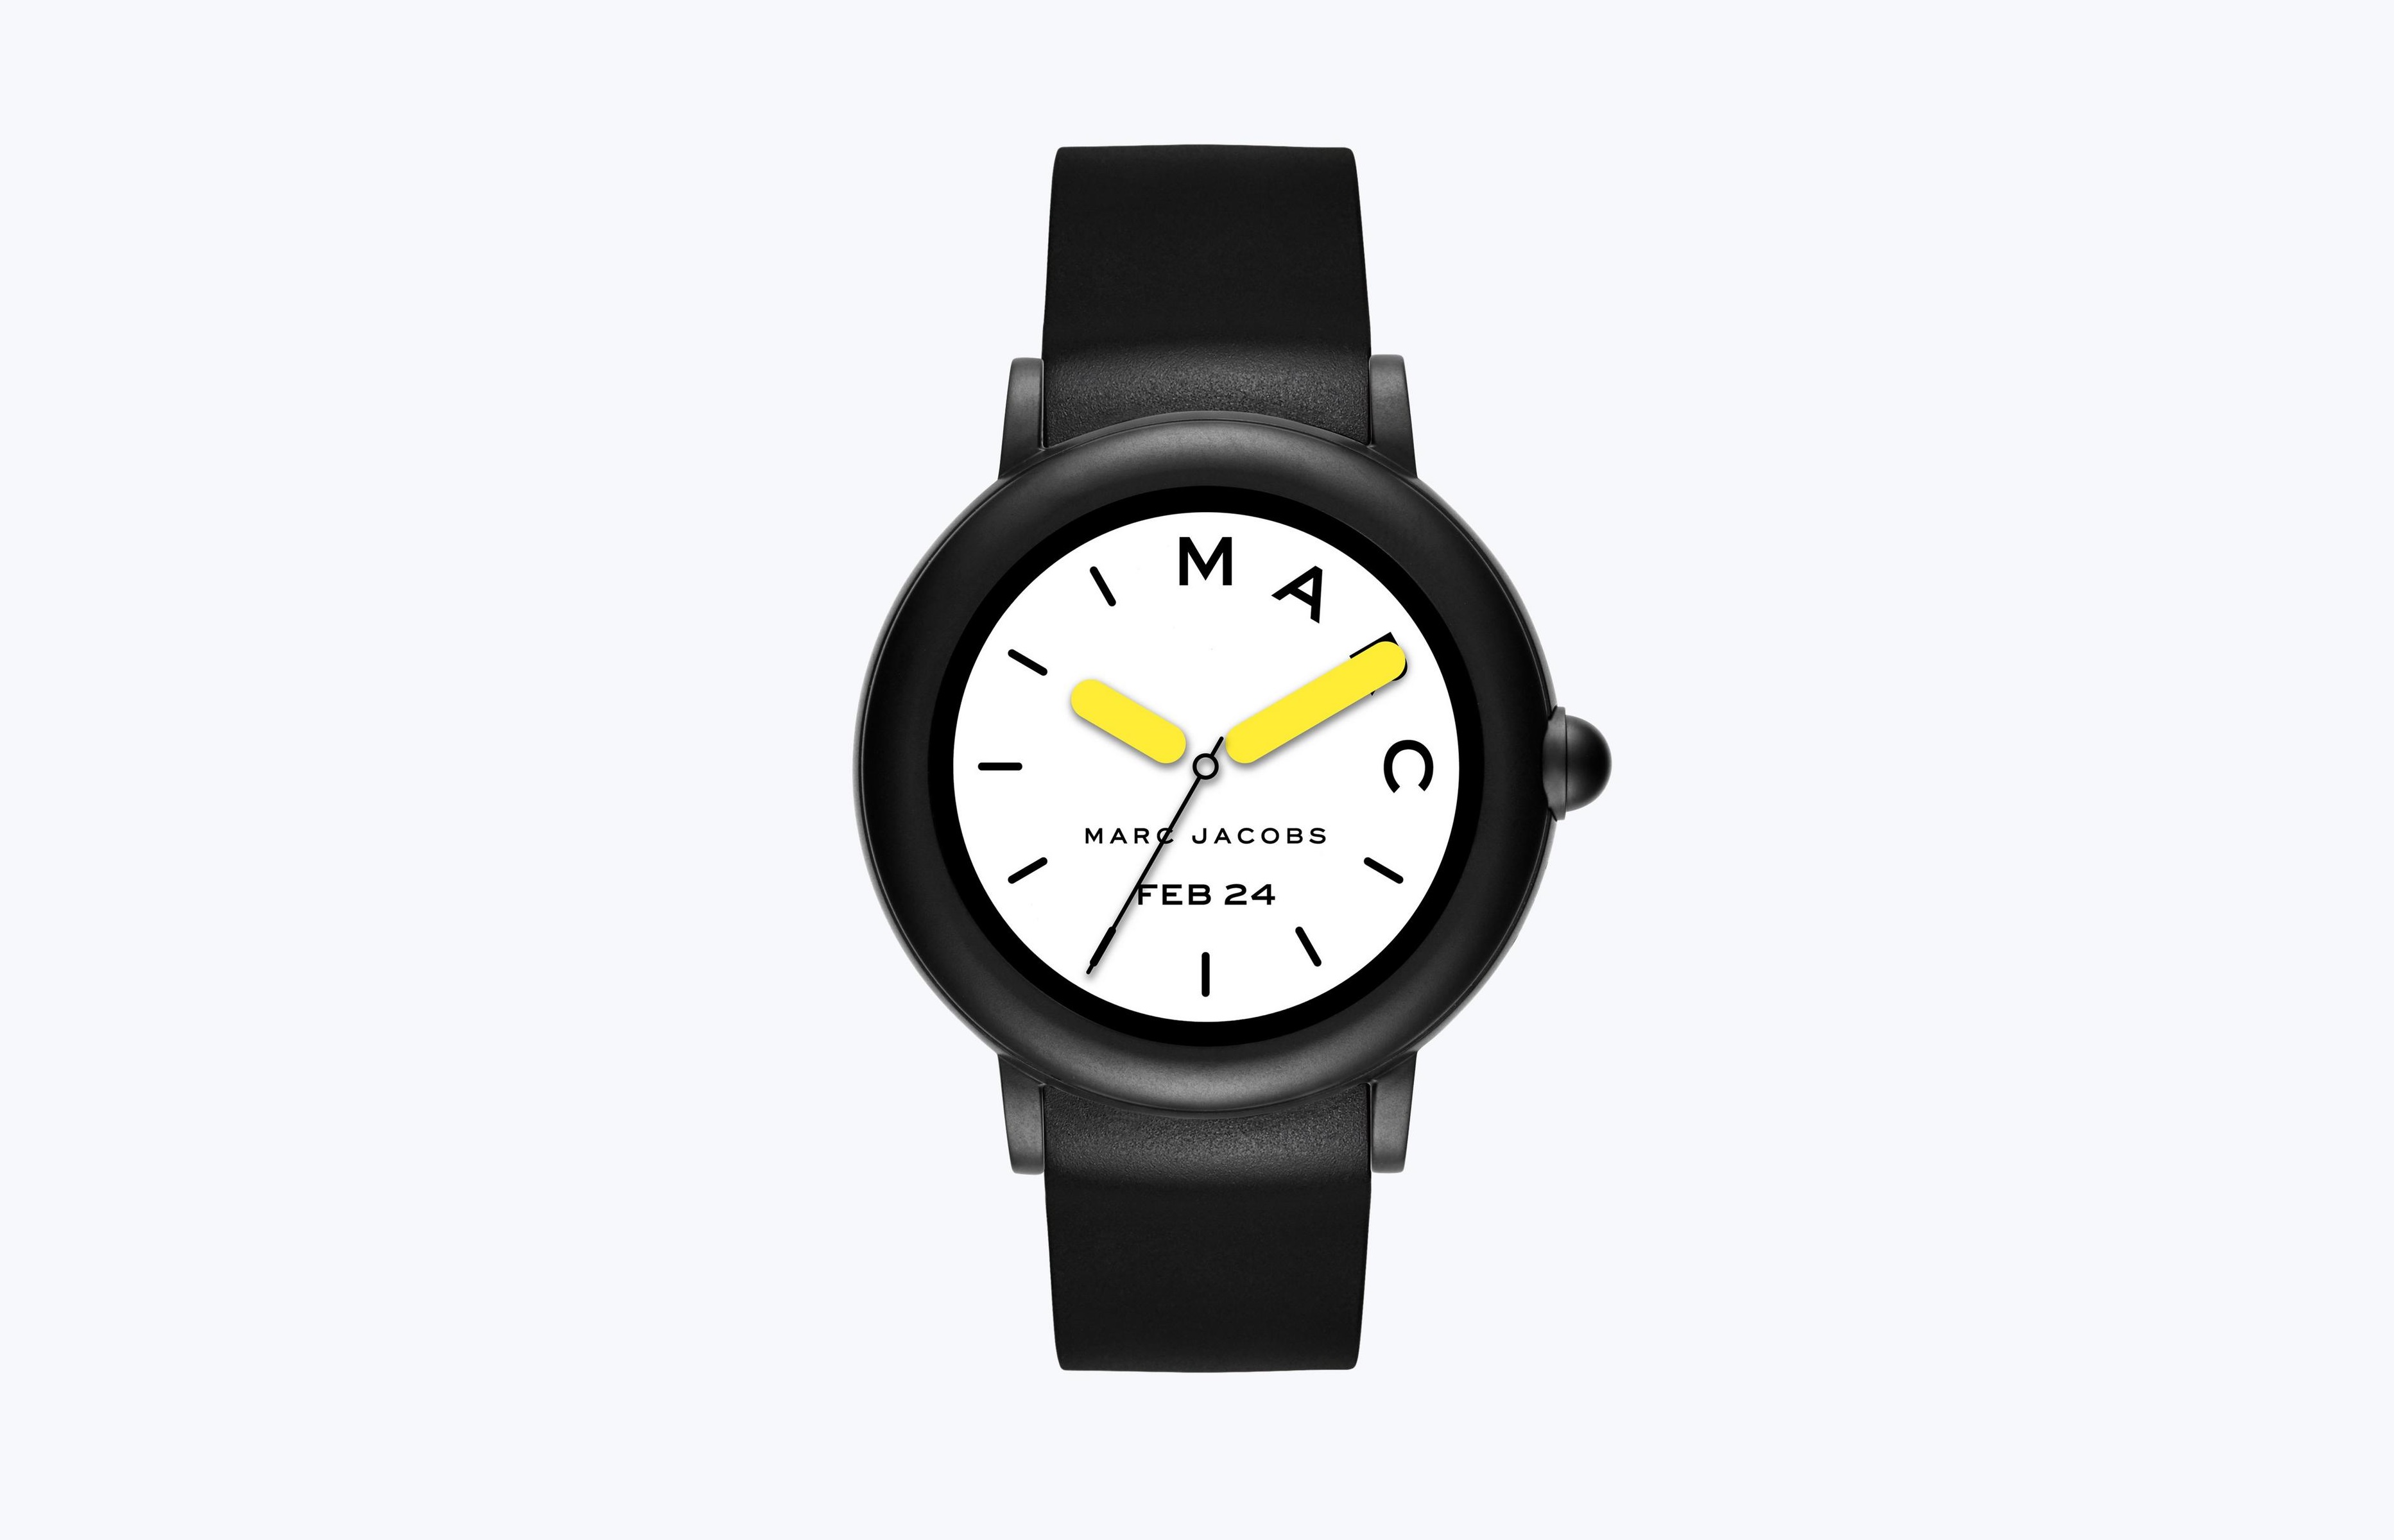 Marc Jacobs Riley smartwatch render from the front in black.